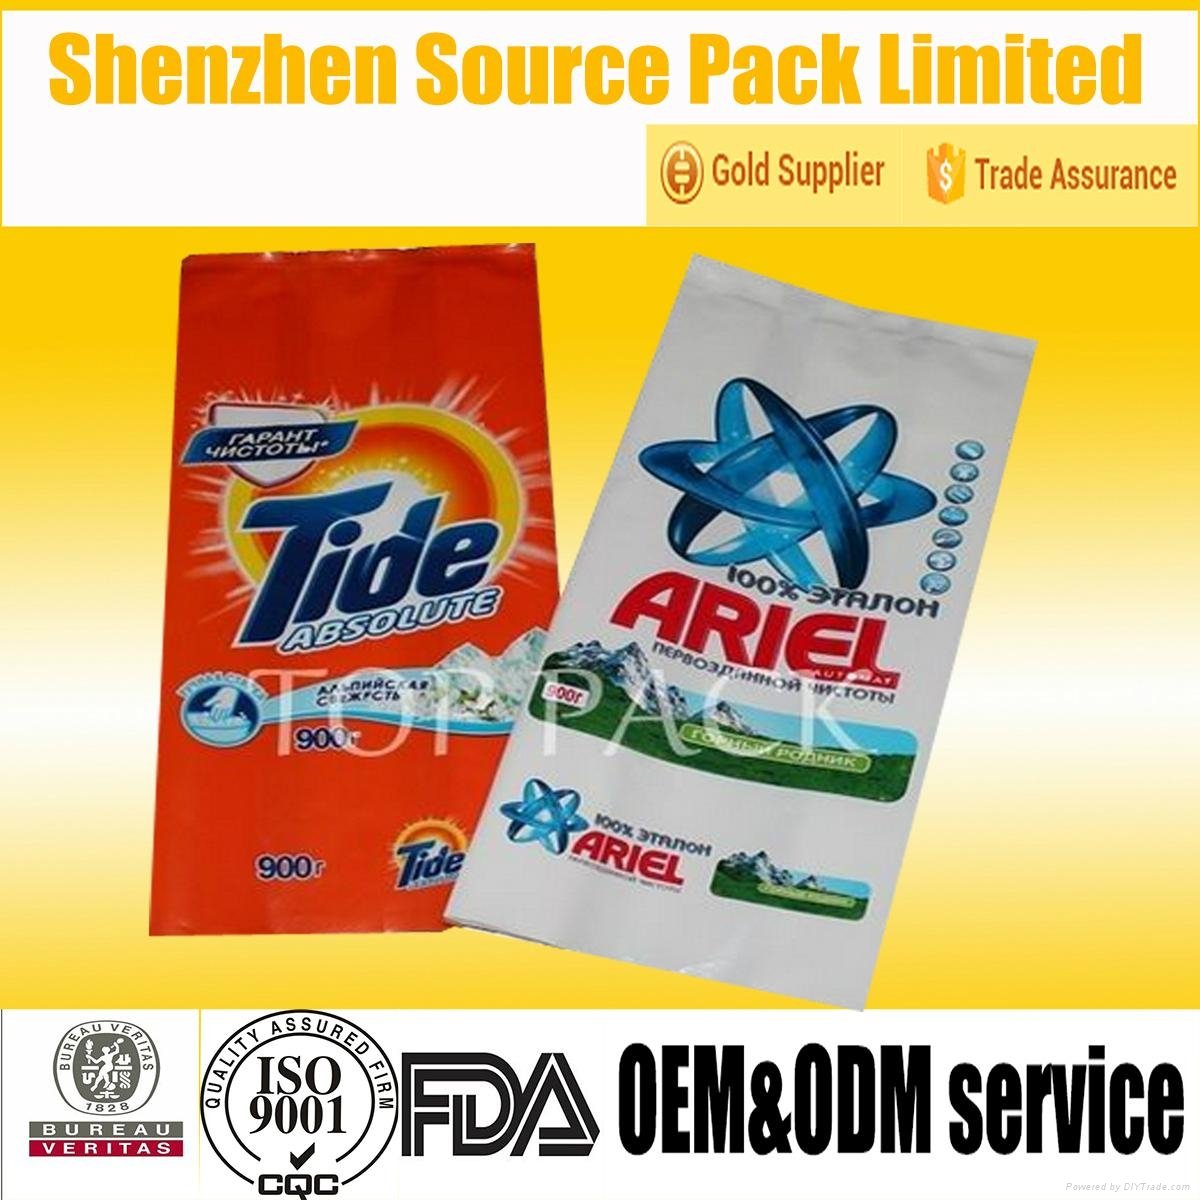 Recyclable and Environmentally Friendly Flexible Detergent Packaging Bags 3